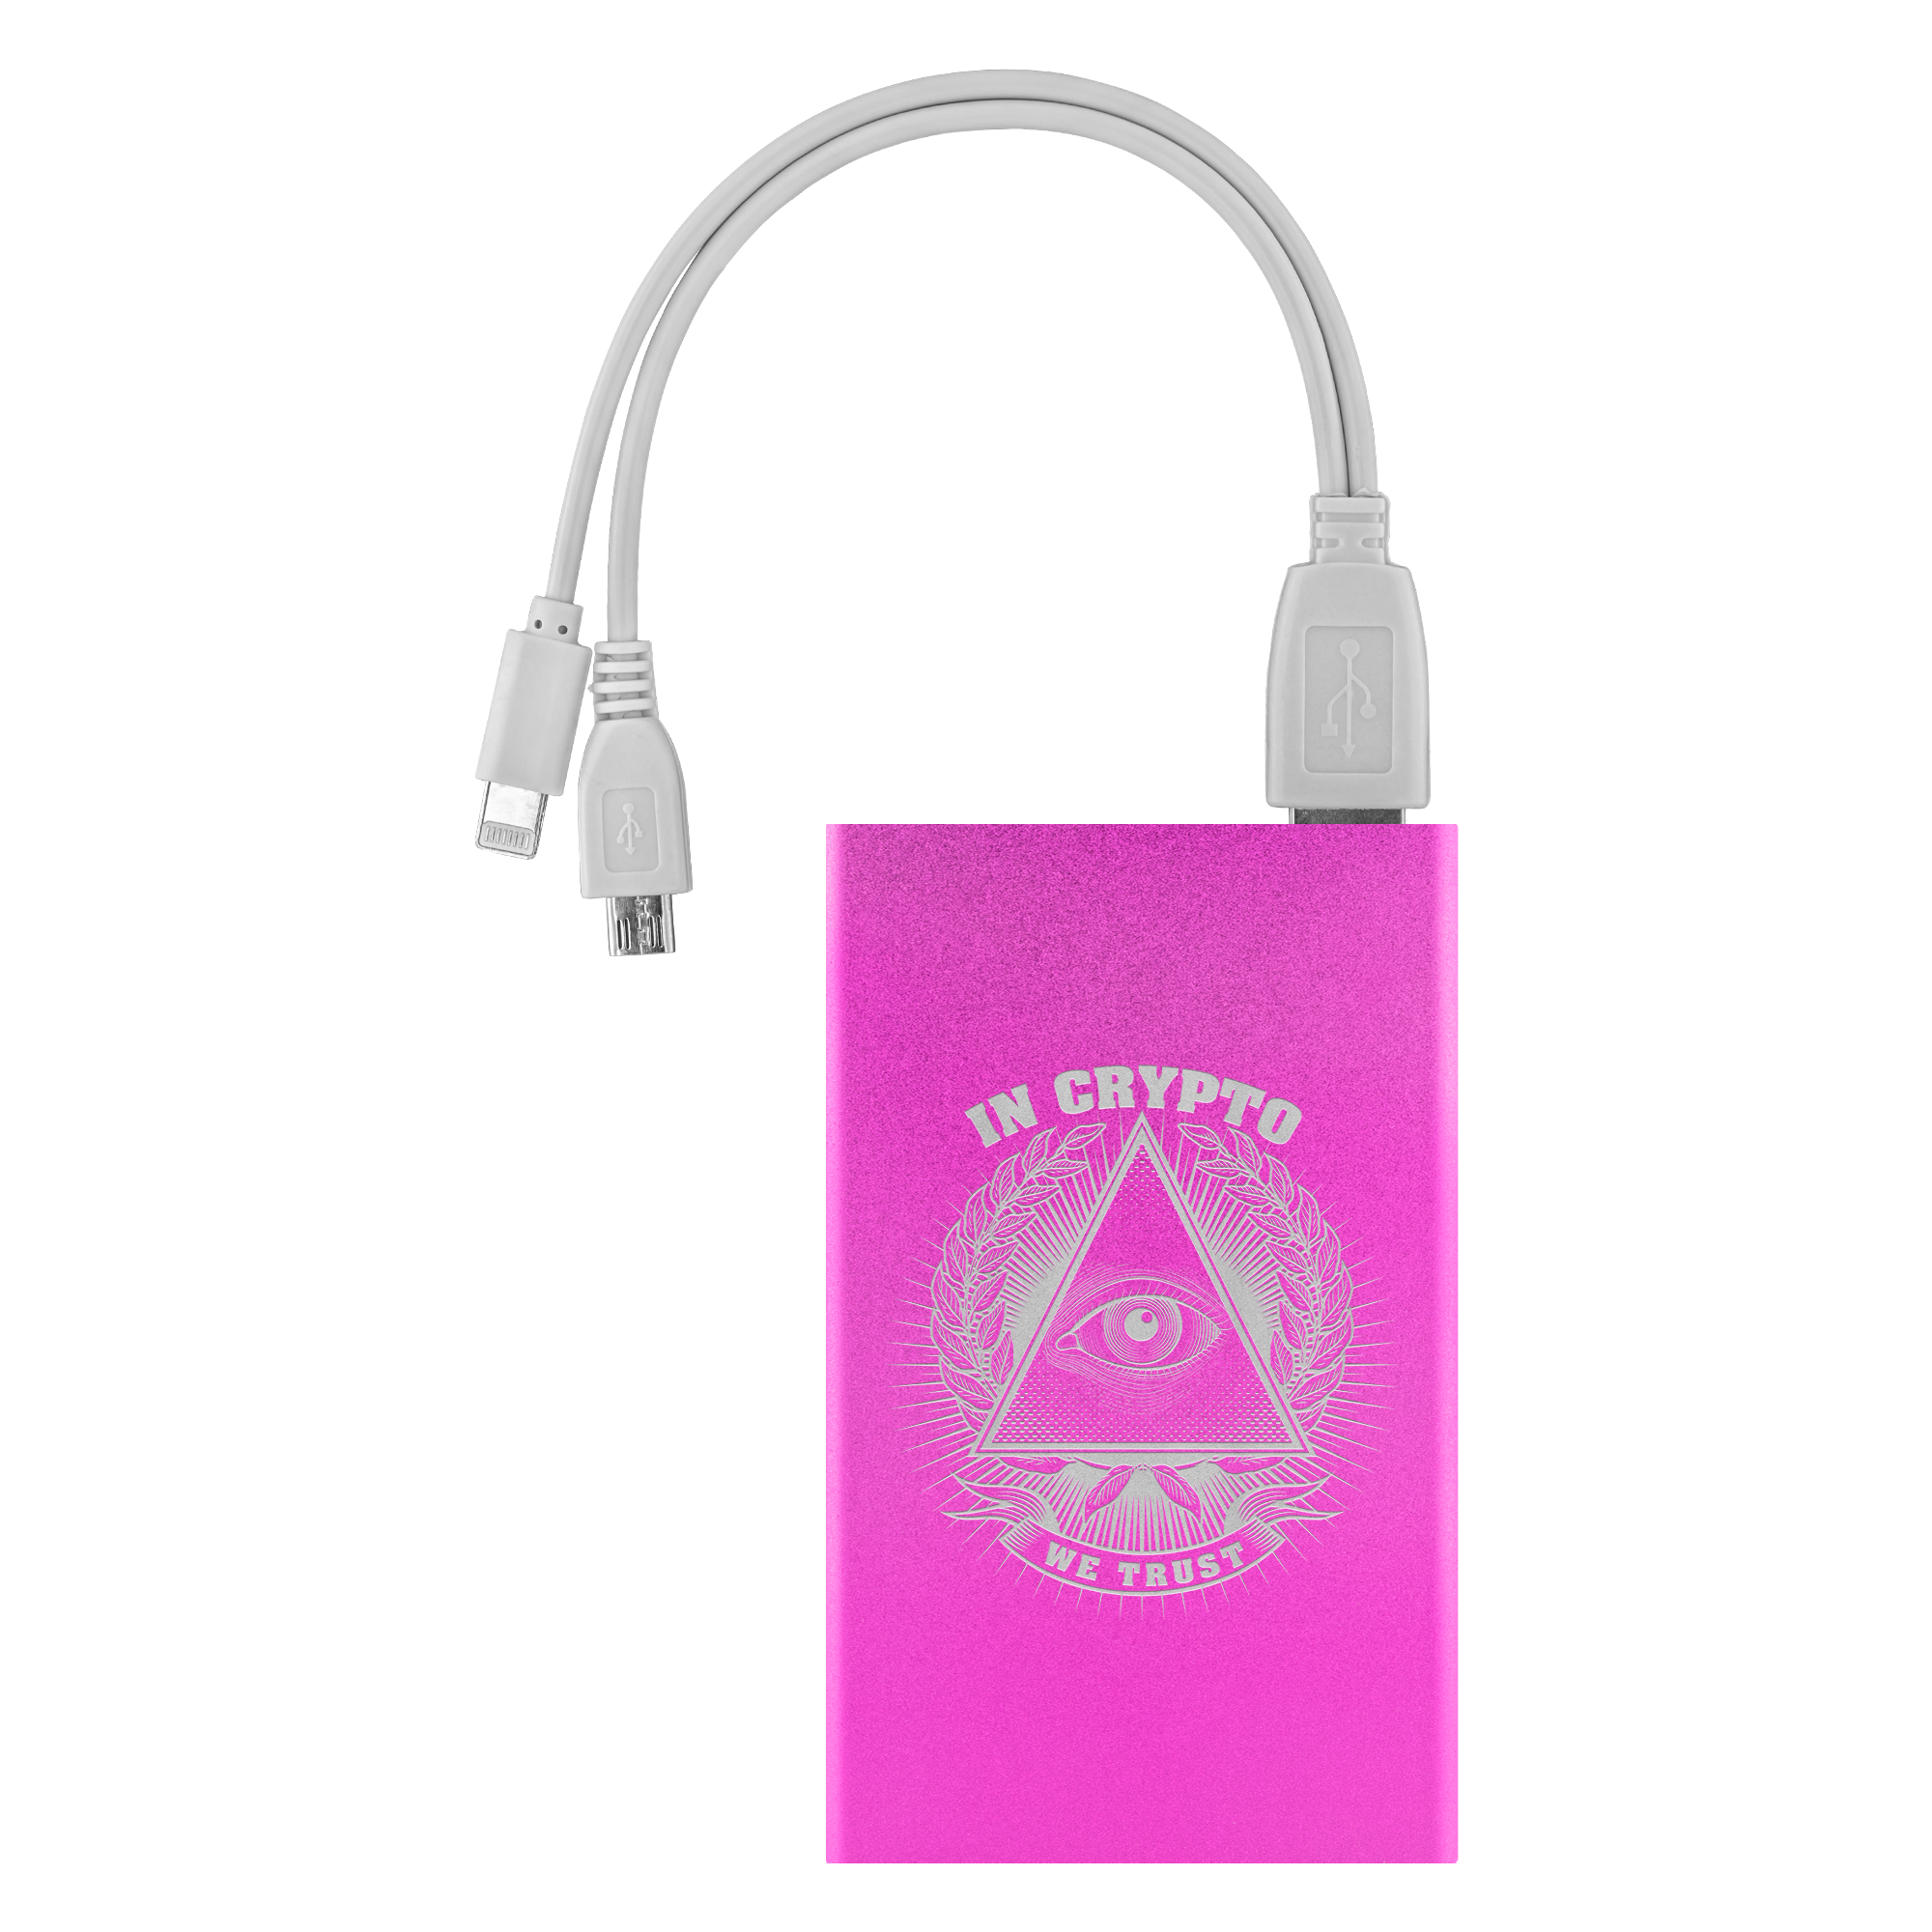 Buy pink Power Bank - In Crypto We Trust